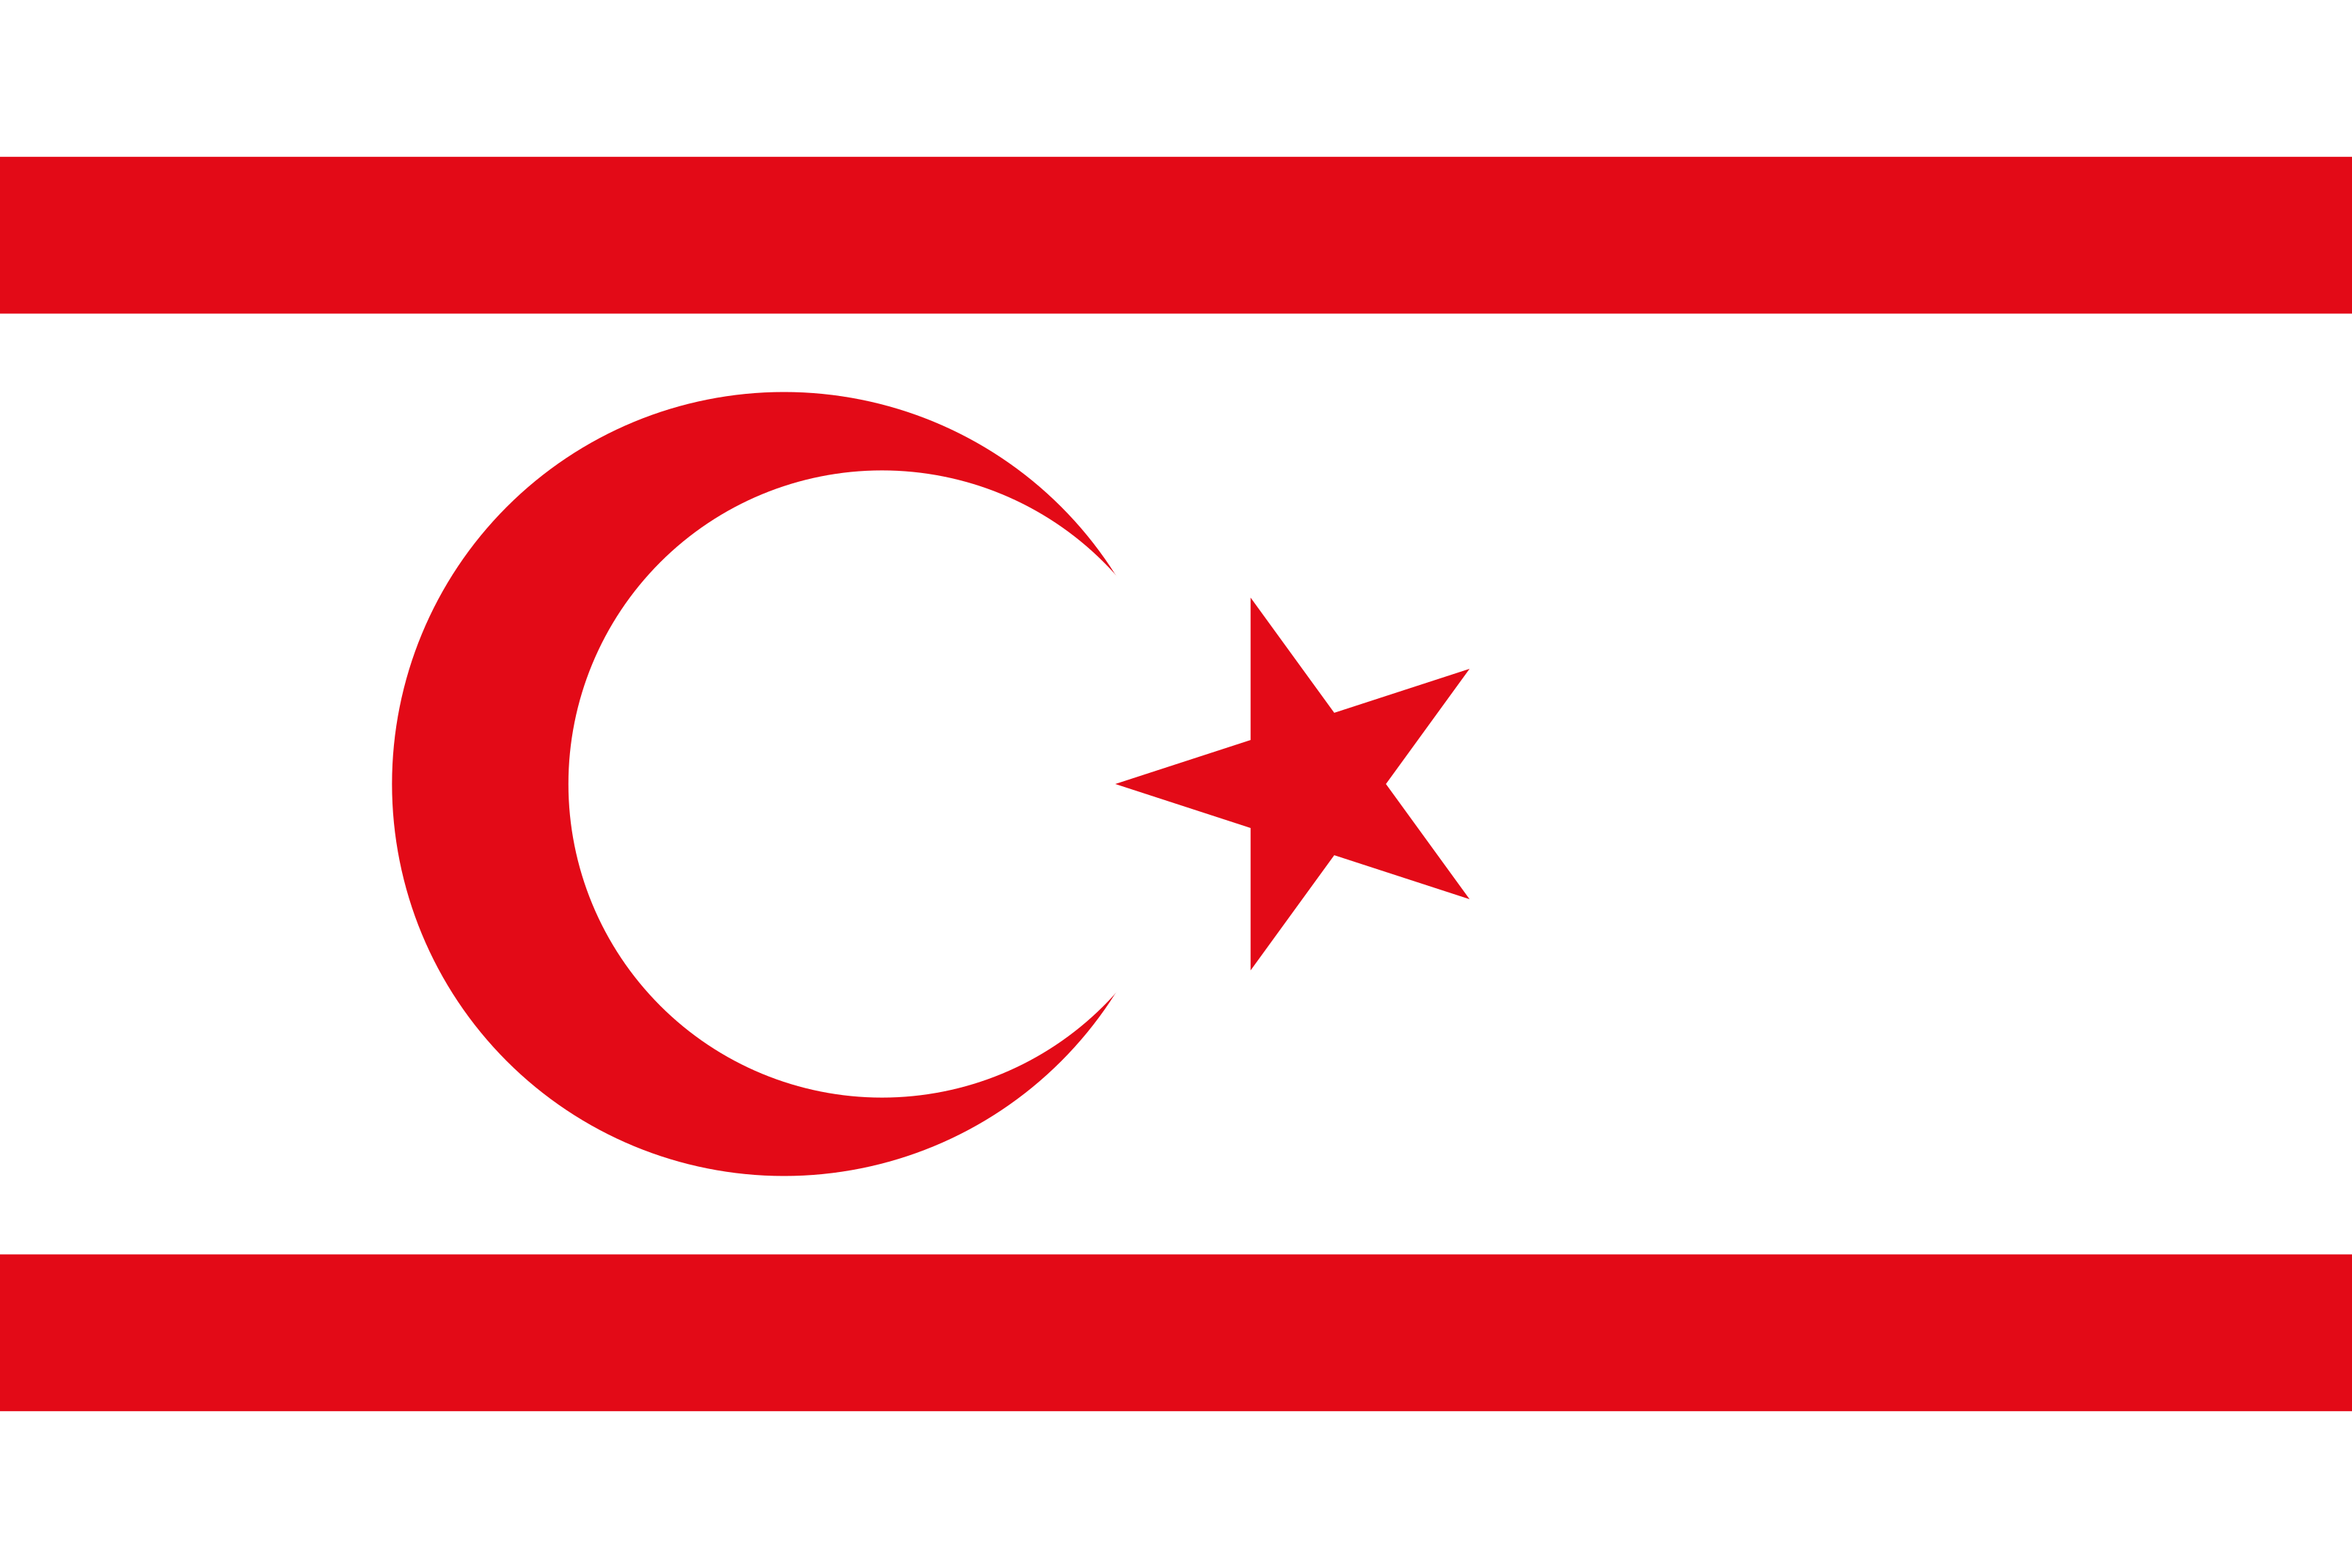 The Turkish Republic of Northern Cyprus Flag Image - Free Download